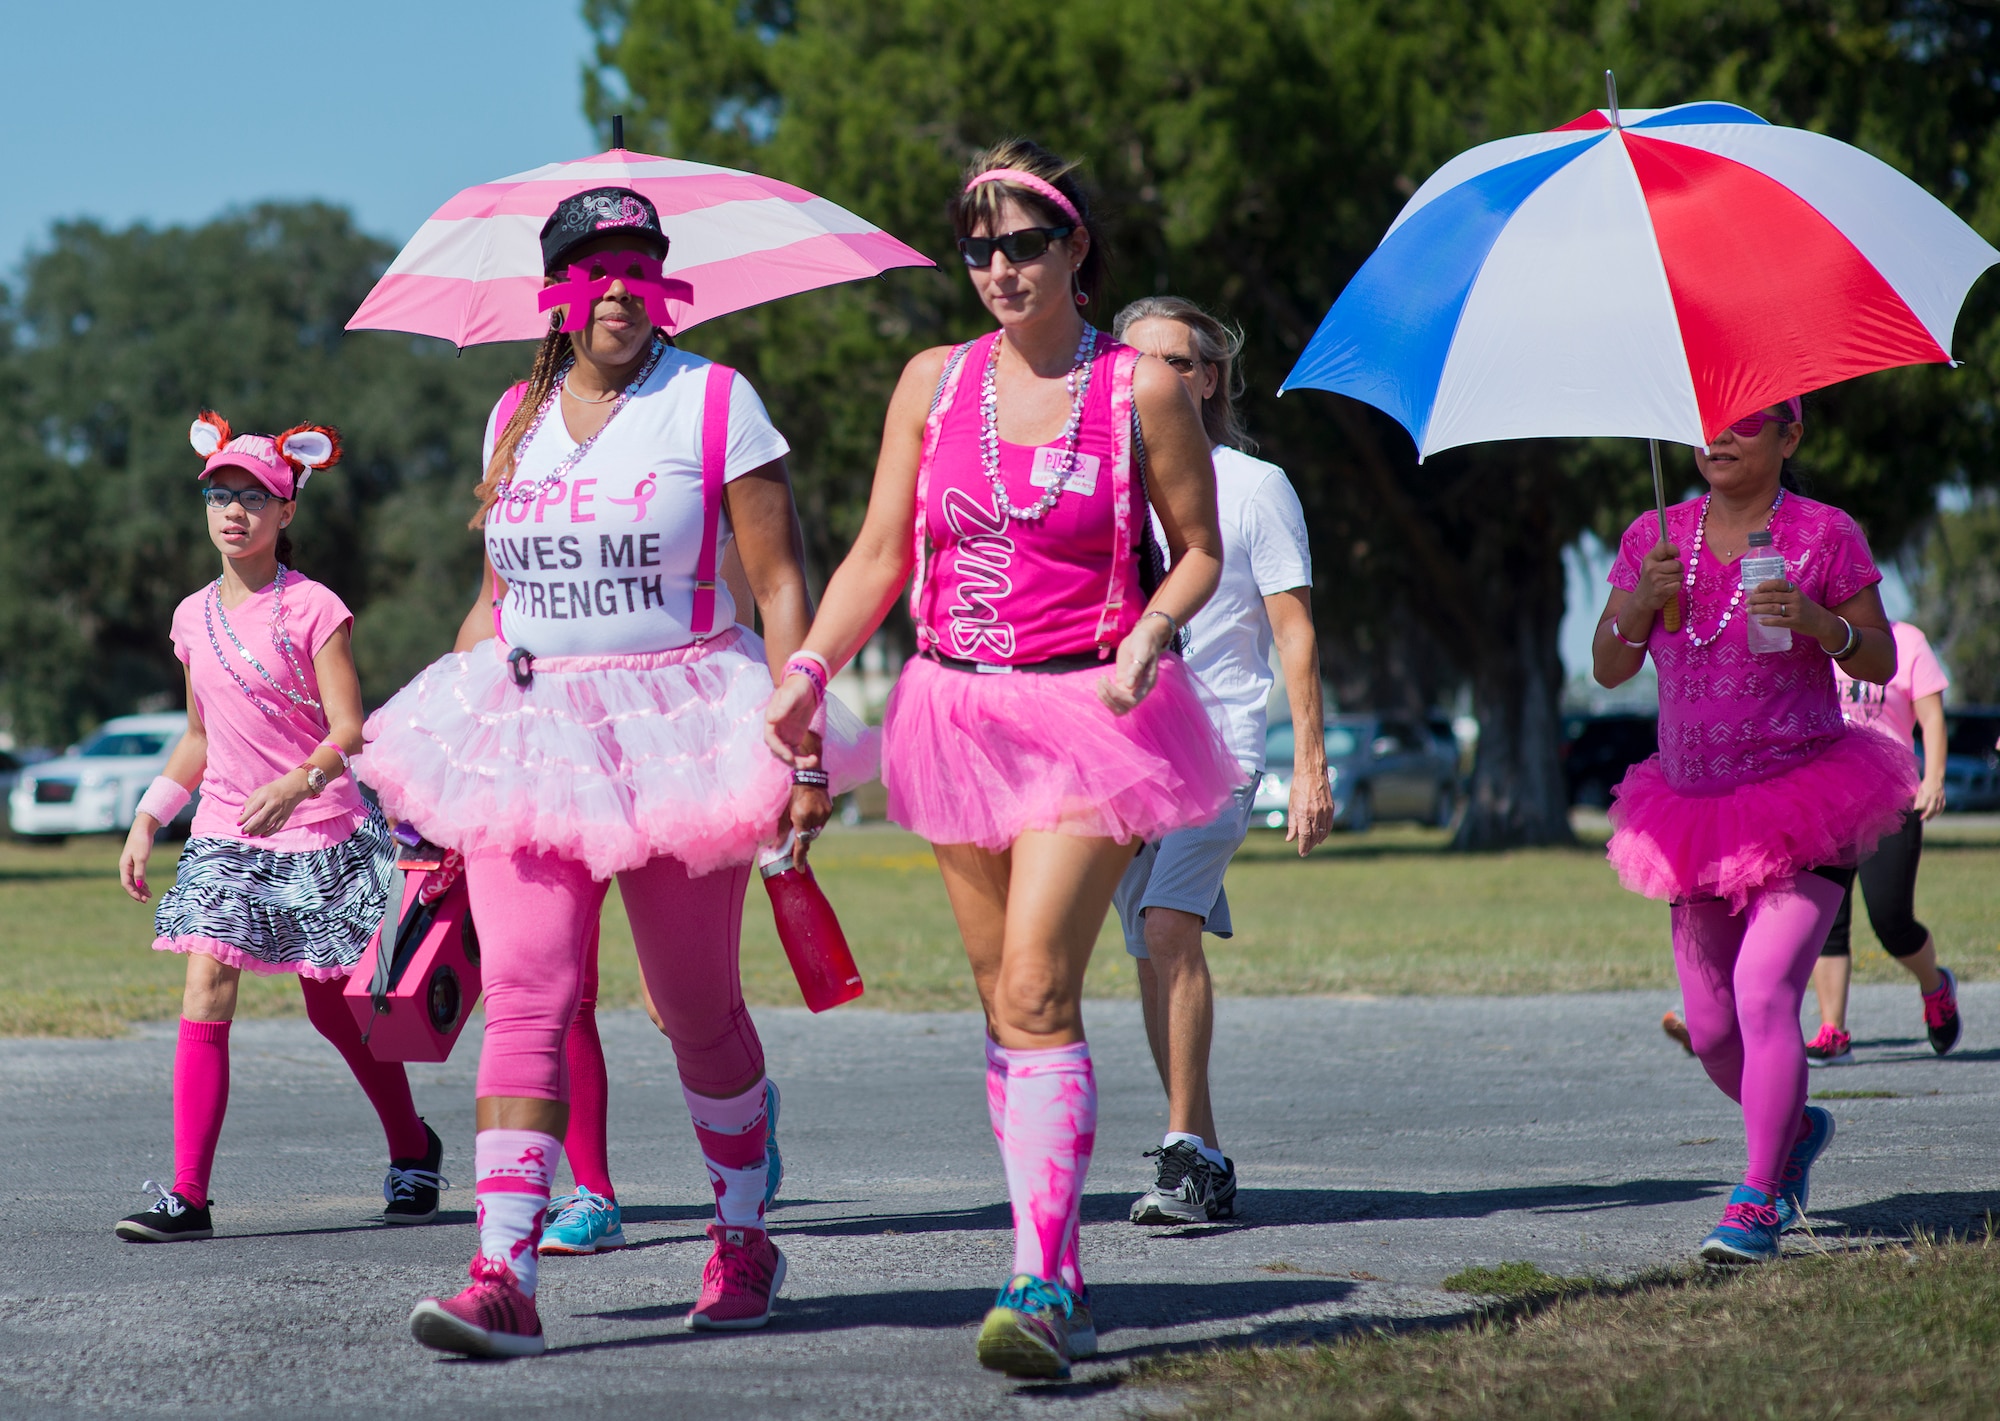 Runners dressed in pink jog to support the Eighth Annual Breast Cancer Awareness 5k run Oct. 17 at Eglin Air Force Base, Fla.  Eglin's health promotion flight was also on hand providing information on breast cancer risk factors, symptoms and screenings. The event was held to promote breast cancer awareness and the importance of self-examination to catch the disease in its early stages. More than 200 supporters came out to run.  (U.S. Air Force photo/Samuel King Jr.)